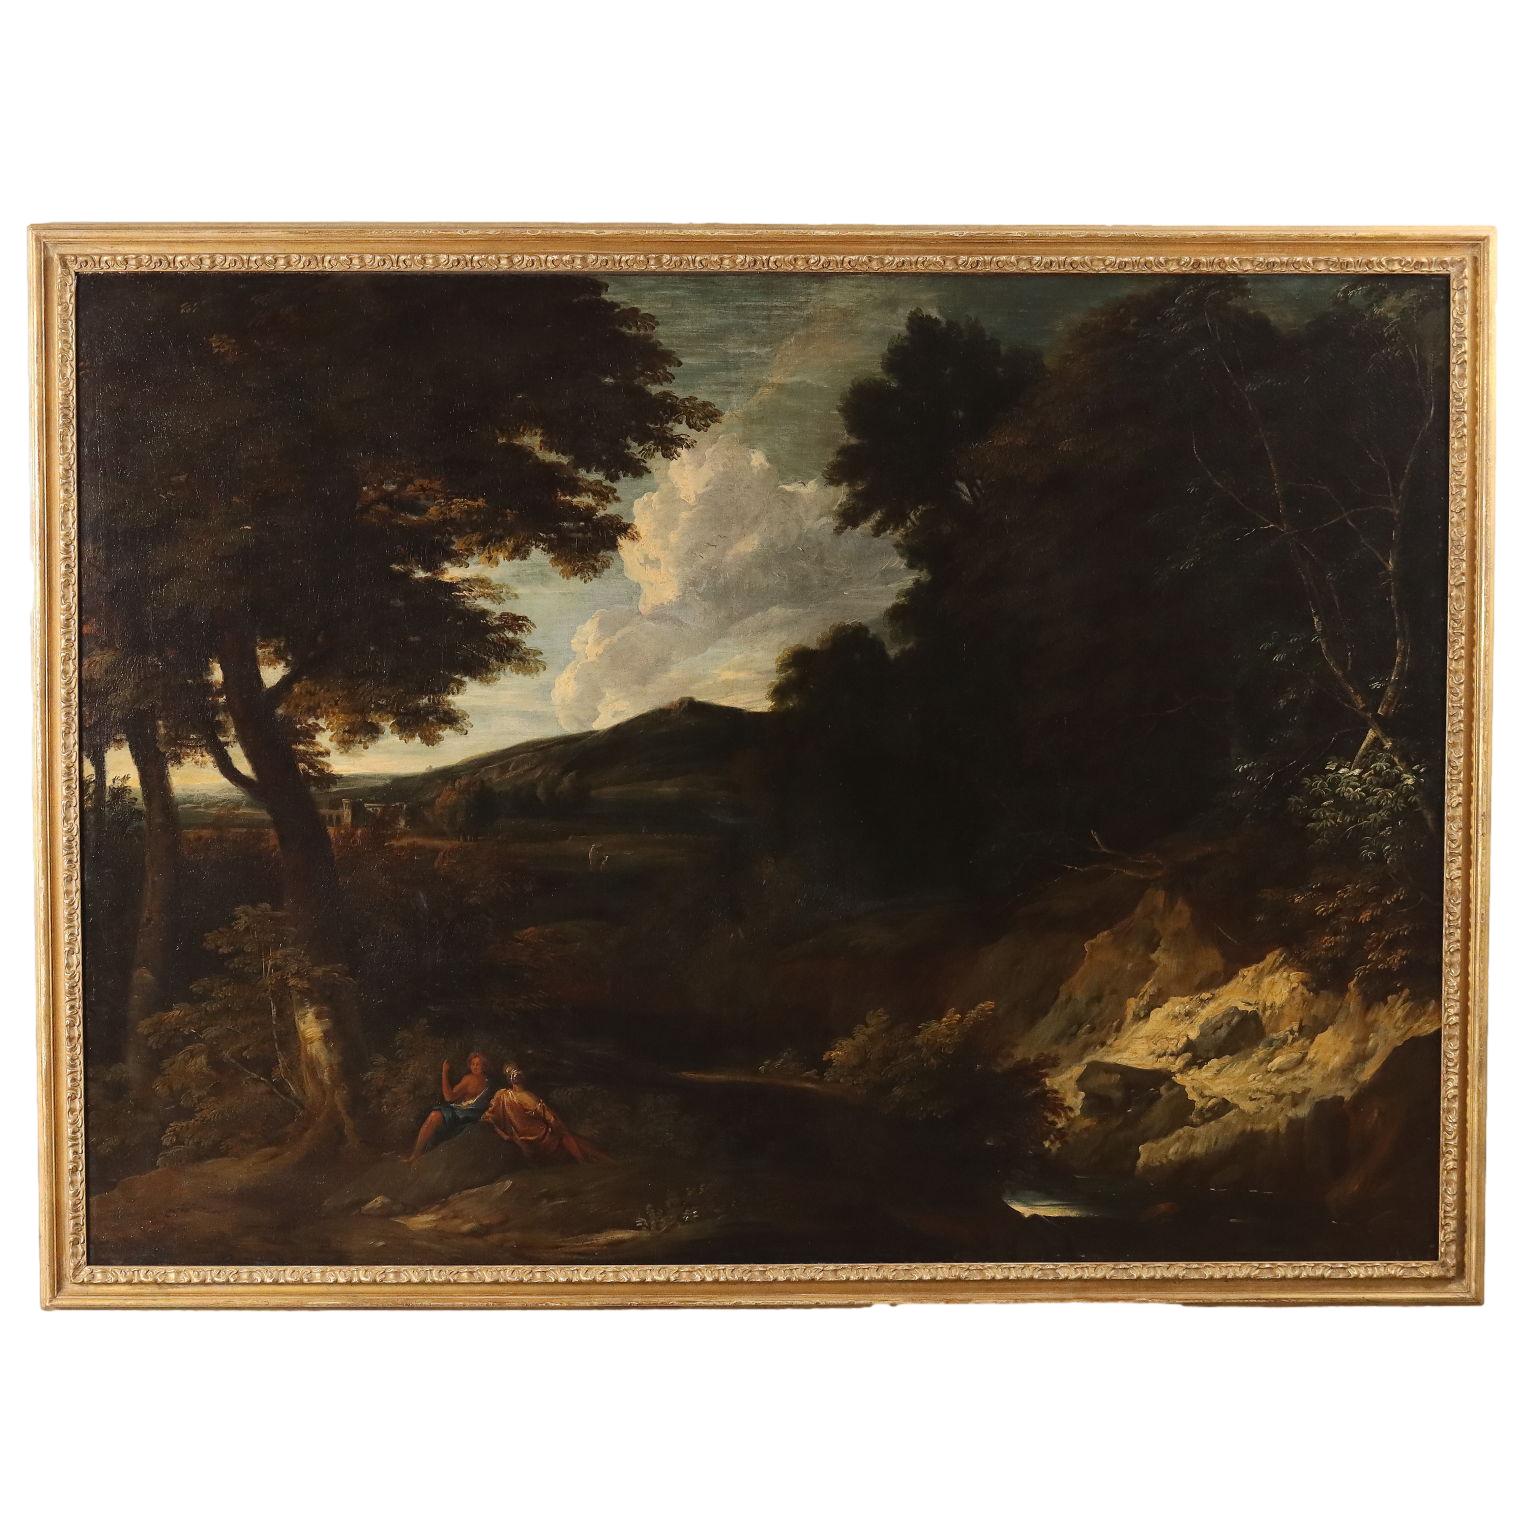 Painting Large Classical Landscape with Figures, 17th century